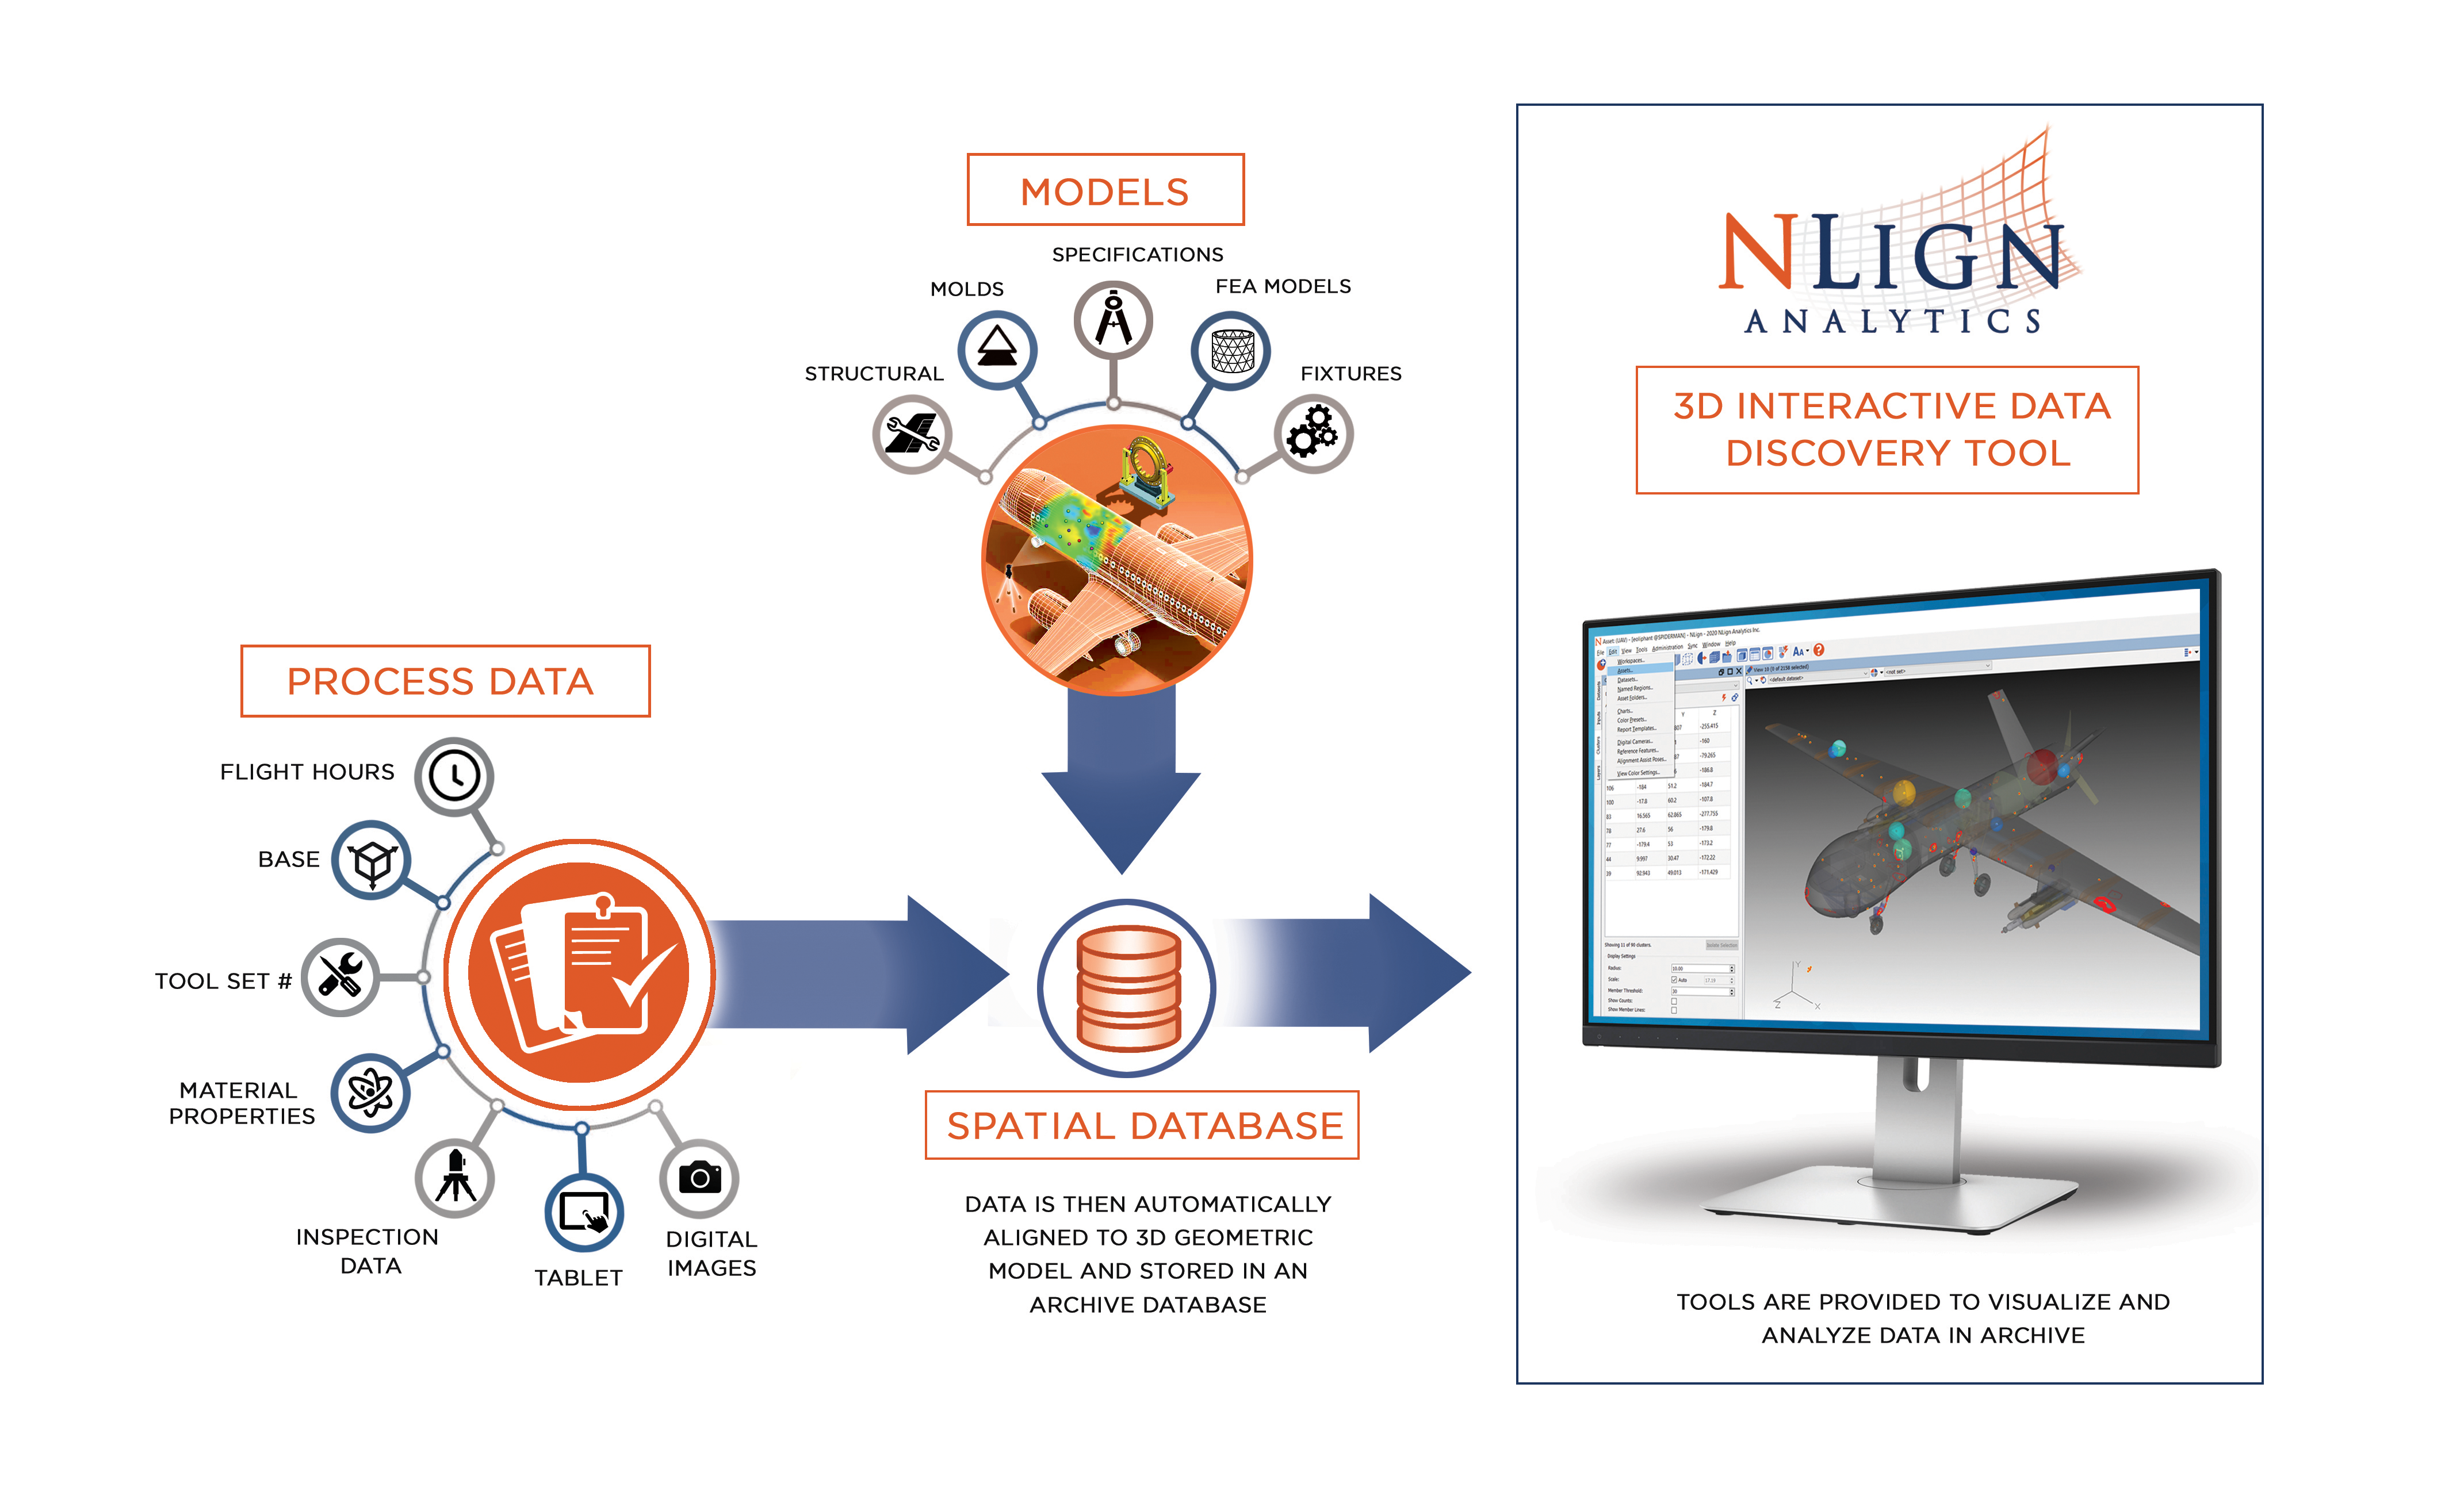 How Does NLign Analytics Work?